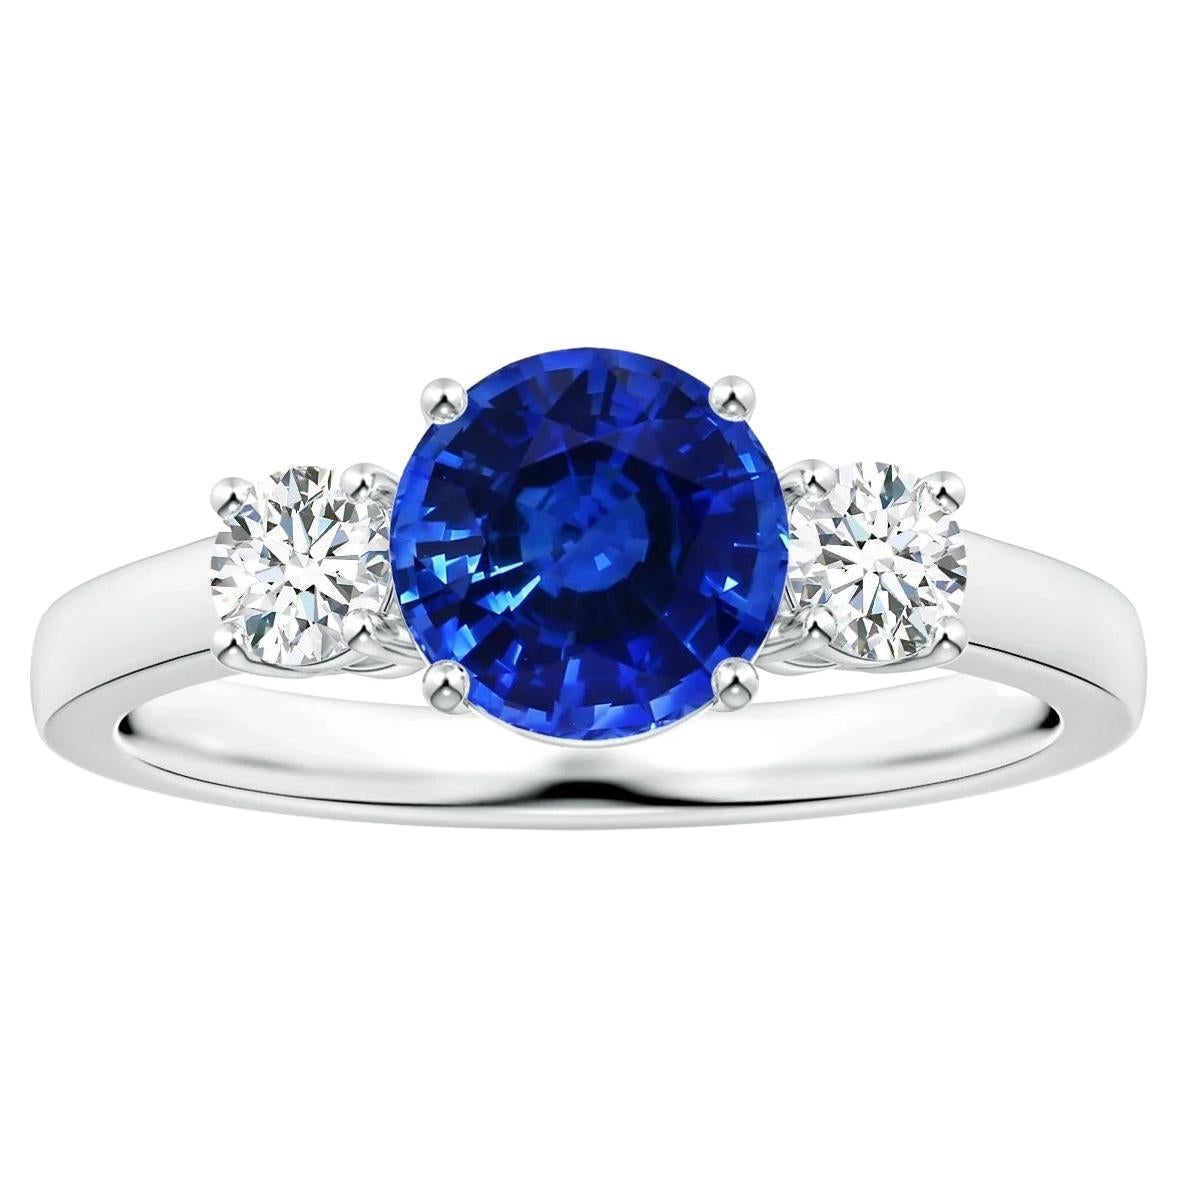 For Sale:  Angara Three Stone Gia Certified Blue Sapphire Ring in White Gold with Diamonds